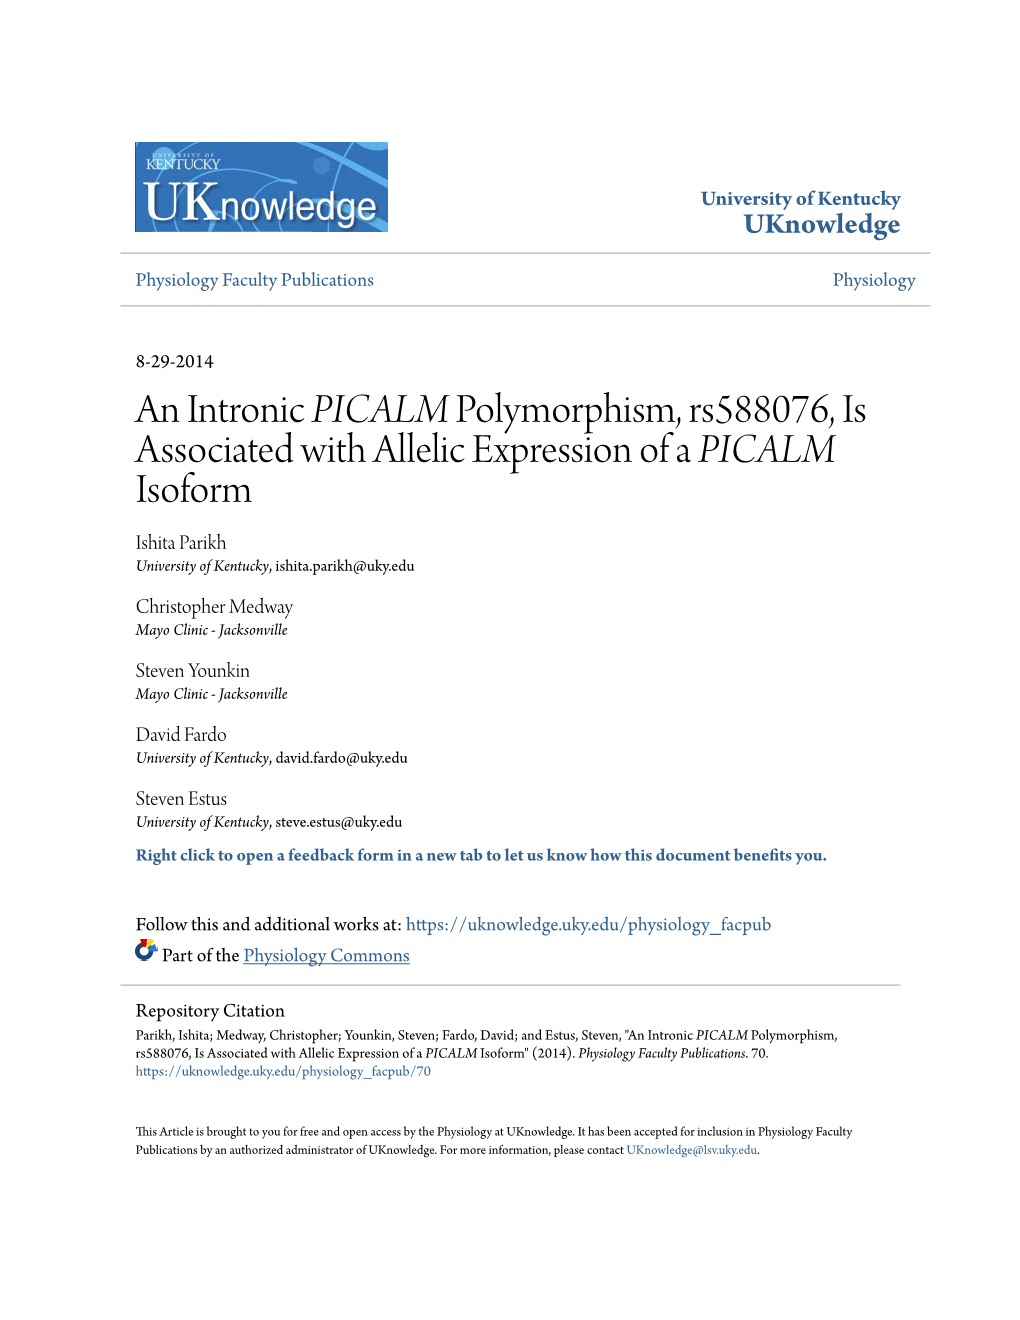 An Intronic &lt;Em&gt;PICALM&lt;/Em&gt; Polymorphism, Rs588076, Is Associated with Allelic Expression of a &lt;Em&gt;PICALM&lt;